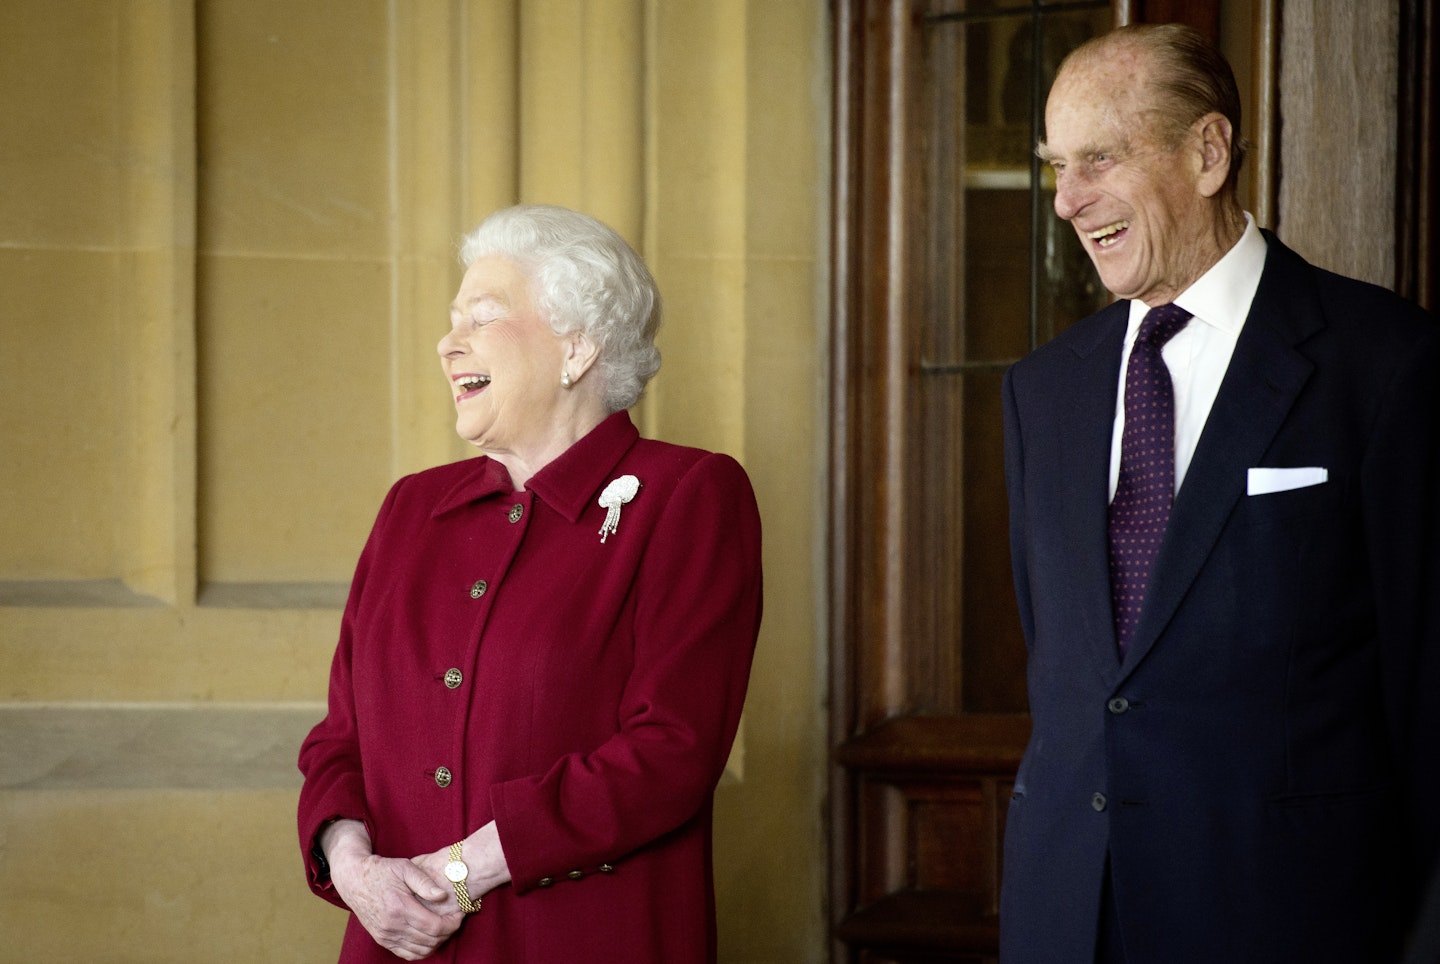 Prince Phillip The Queen marriage love story